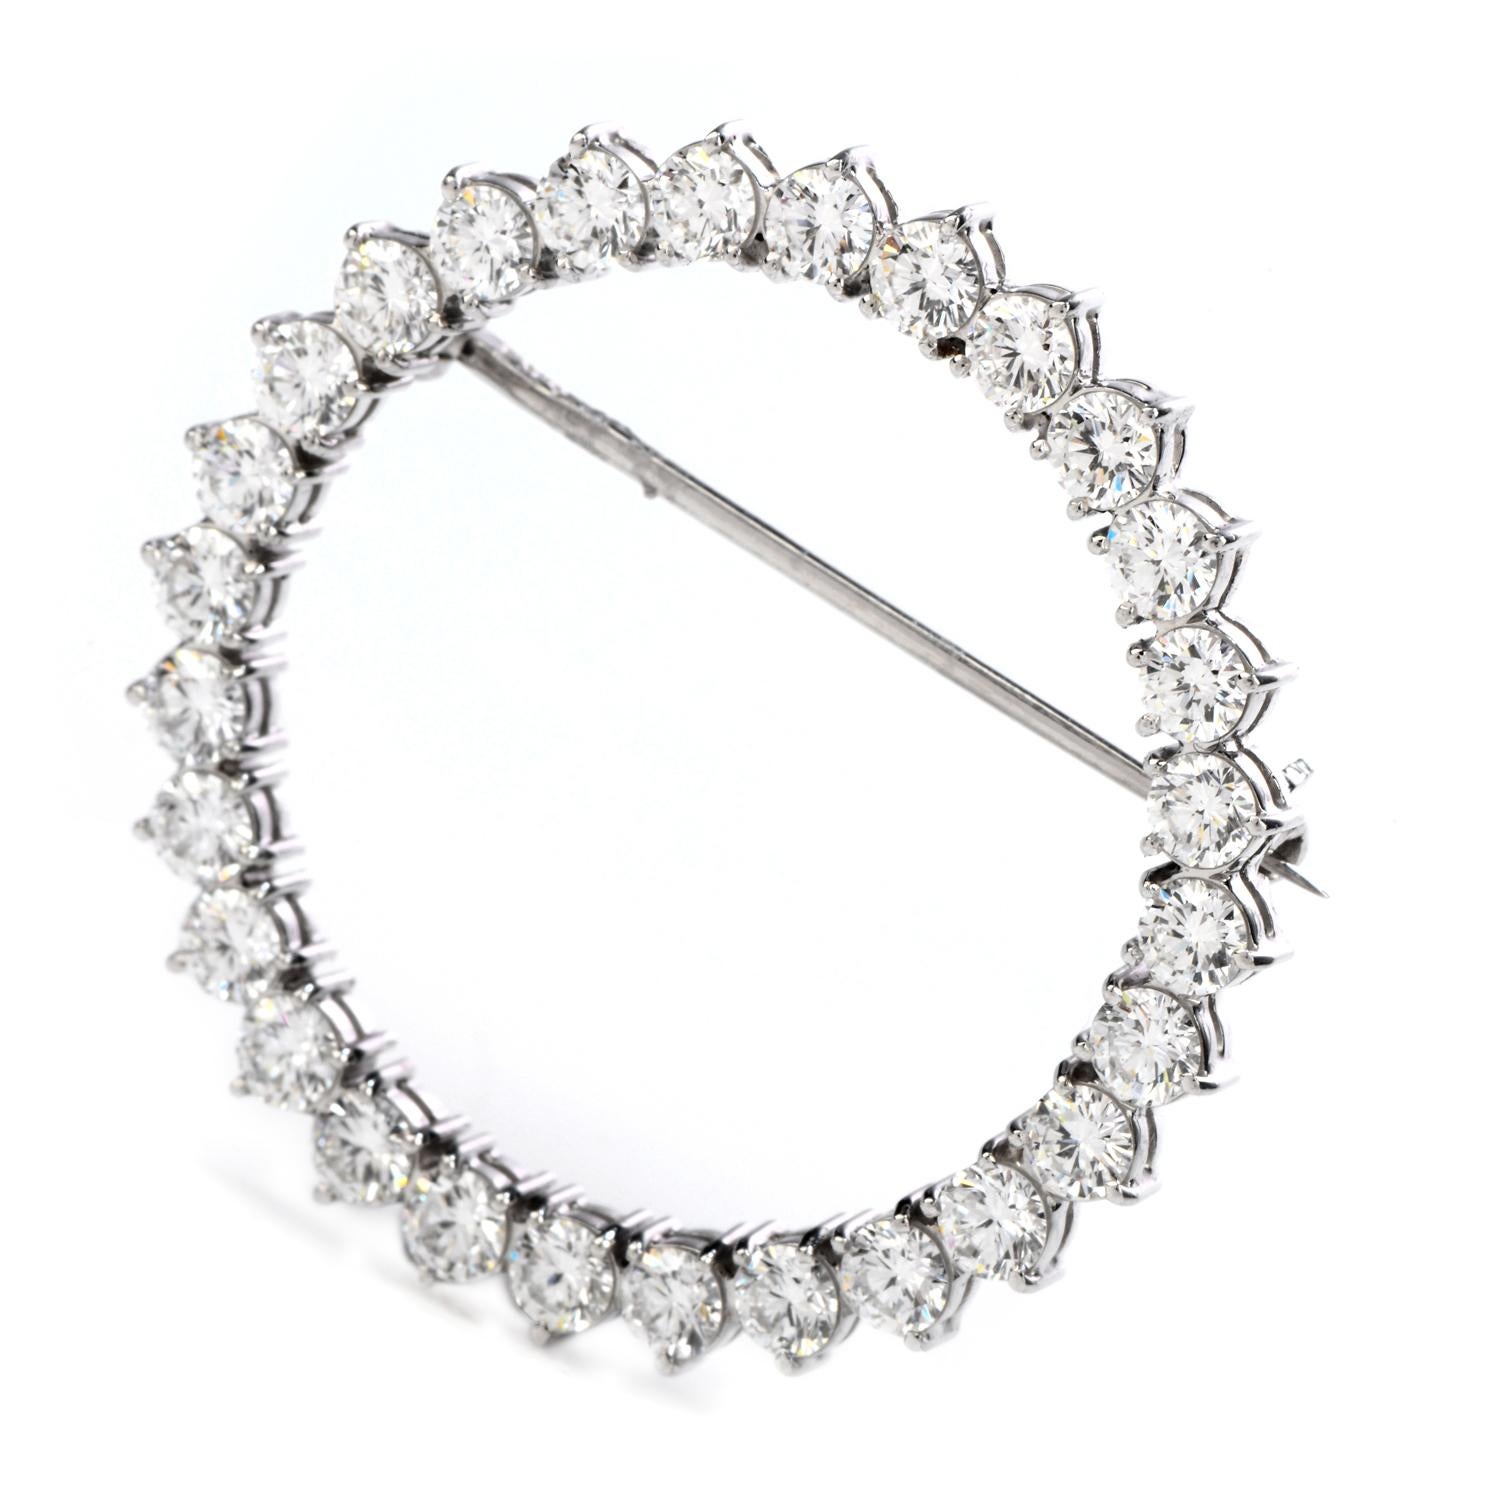 Bright and dazzling with this vintage 1960's diamond & platinum brooch, wreath inspired with a circular shape.

Crafted in solid platinum, composed by 28 round-cut, prong set, Diamonds weighing approximately 3.00 carats F-G color and VS clarity

The